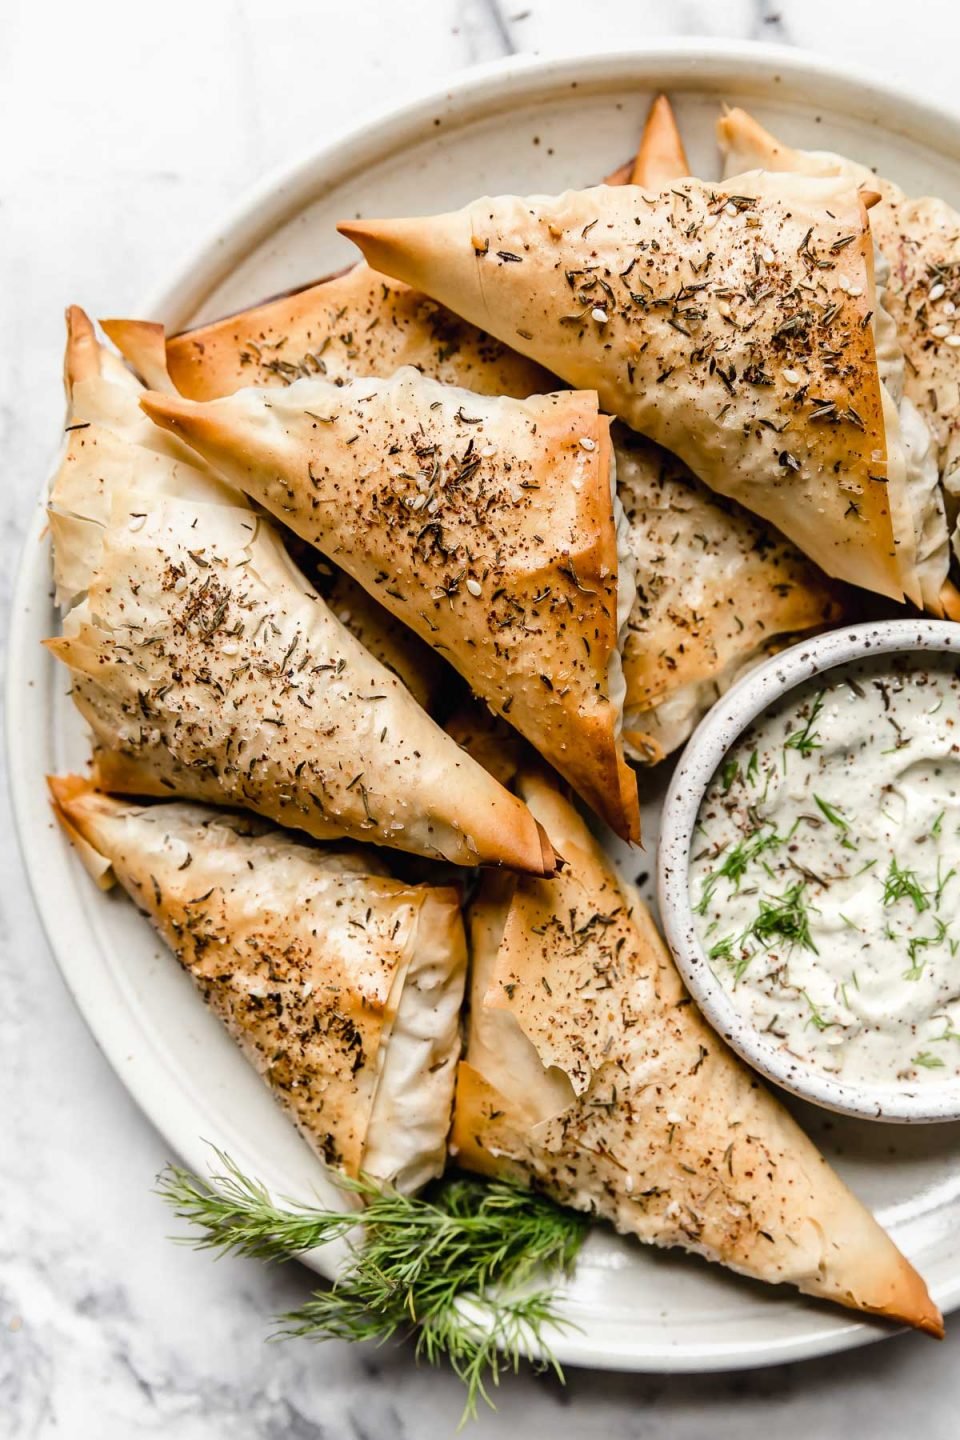 Baked Spanakopita Triangles on a plate with tzatziki sauce.